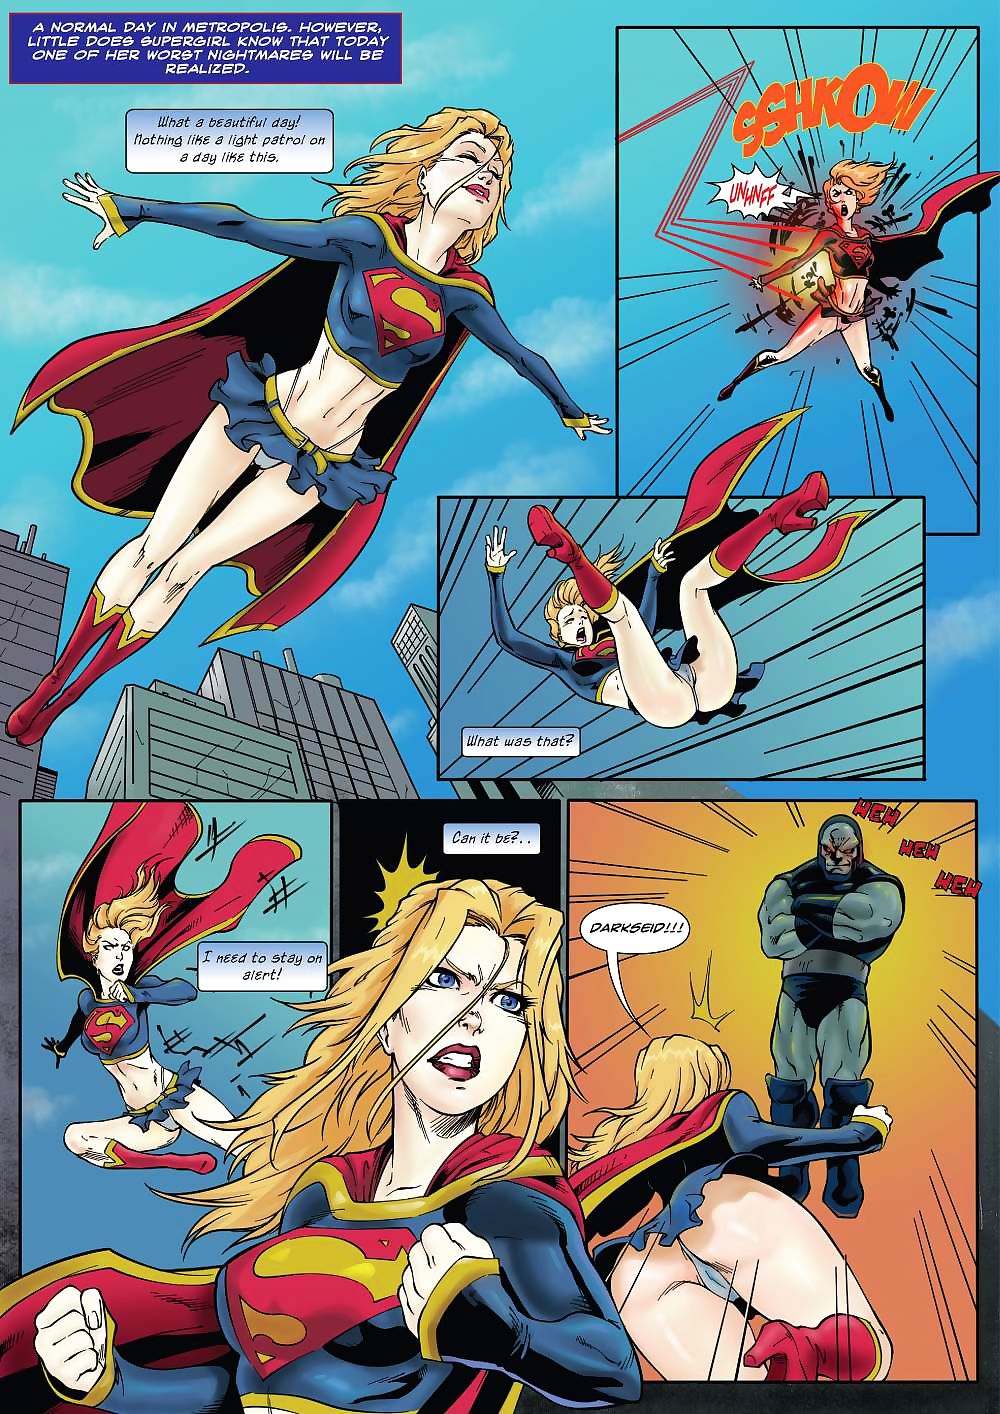 supergirl’s Letzte stand